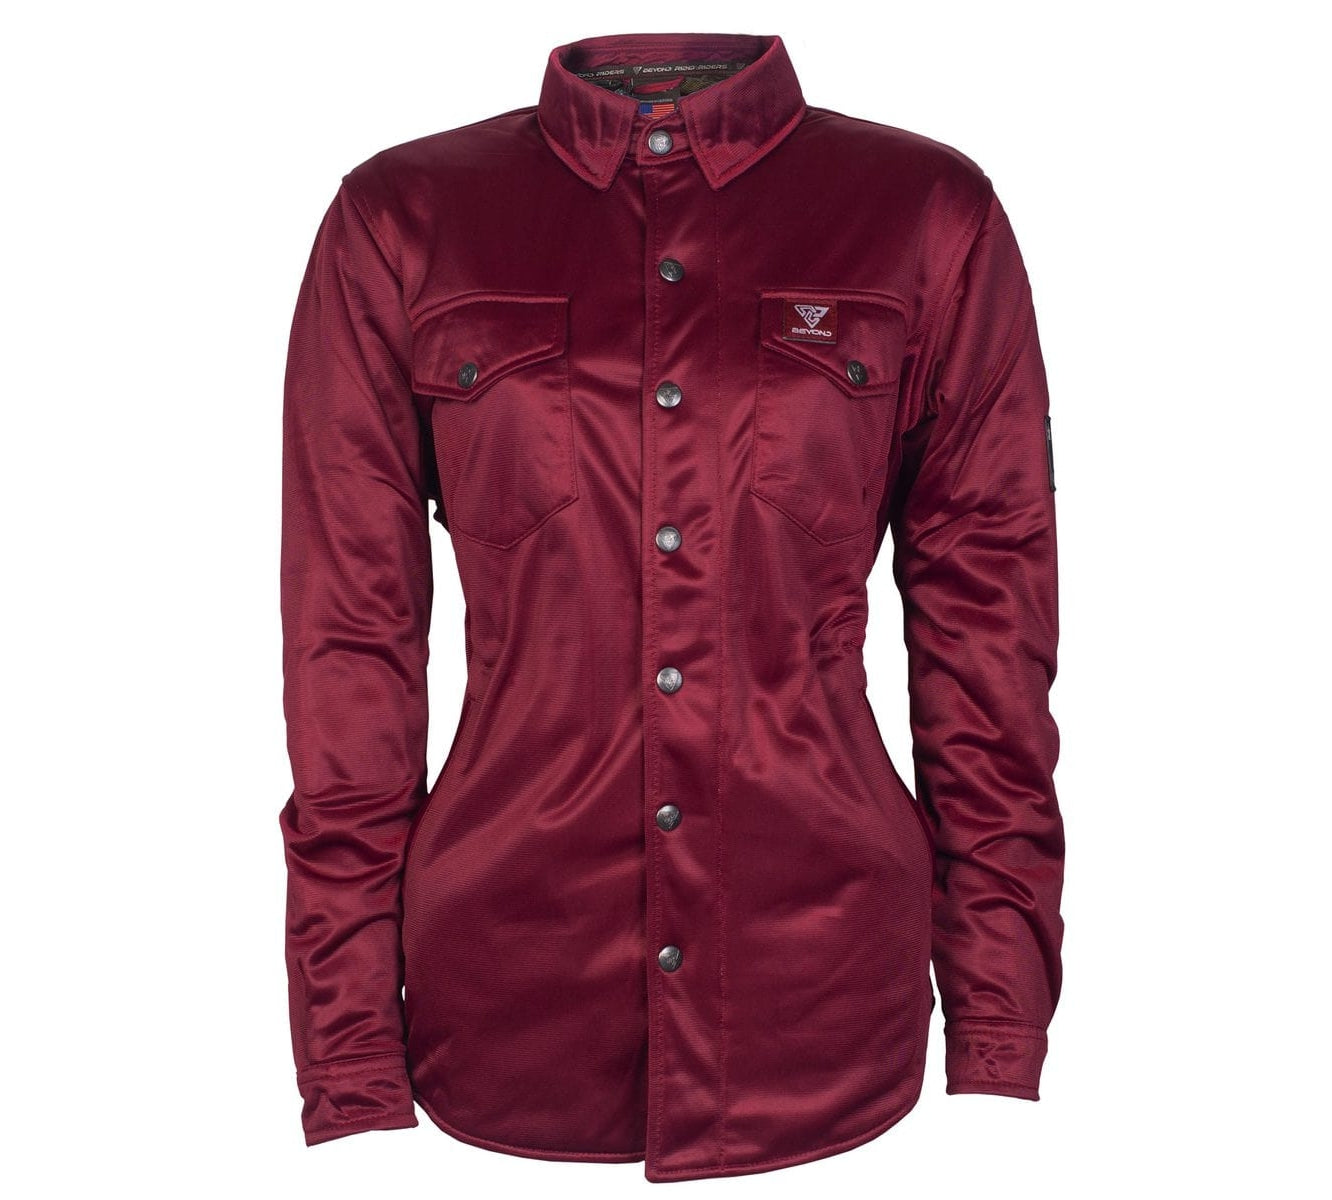 Ultra Protective Shirt for Women - Red Maroon Solid with Pads